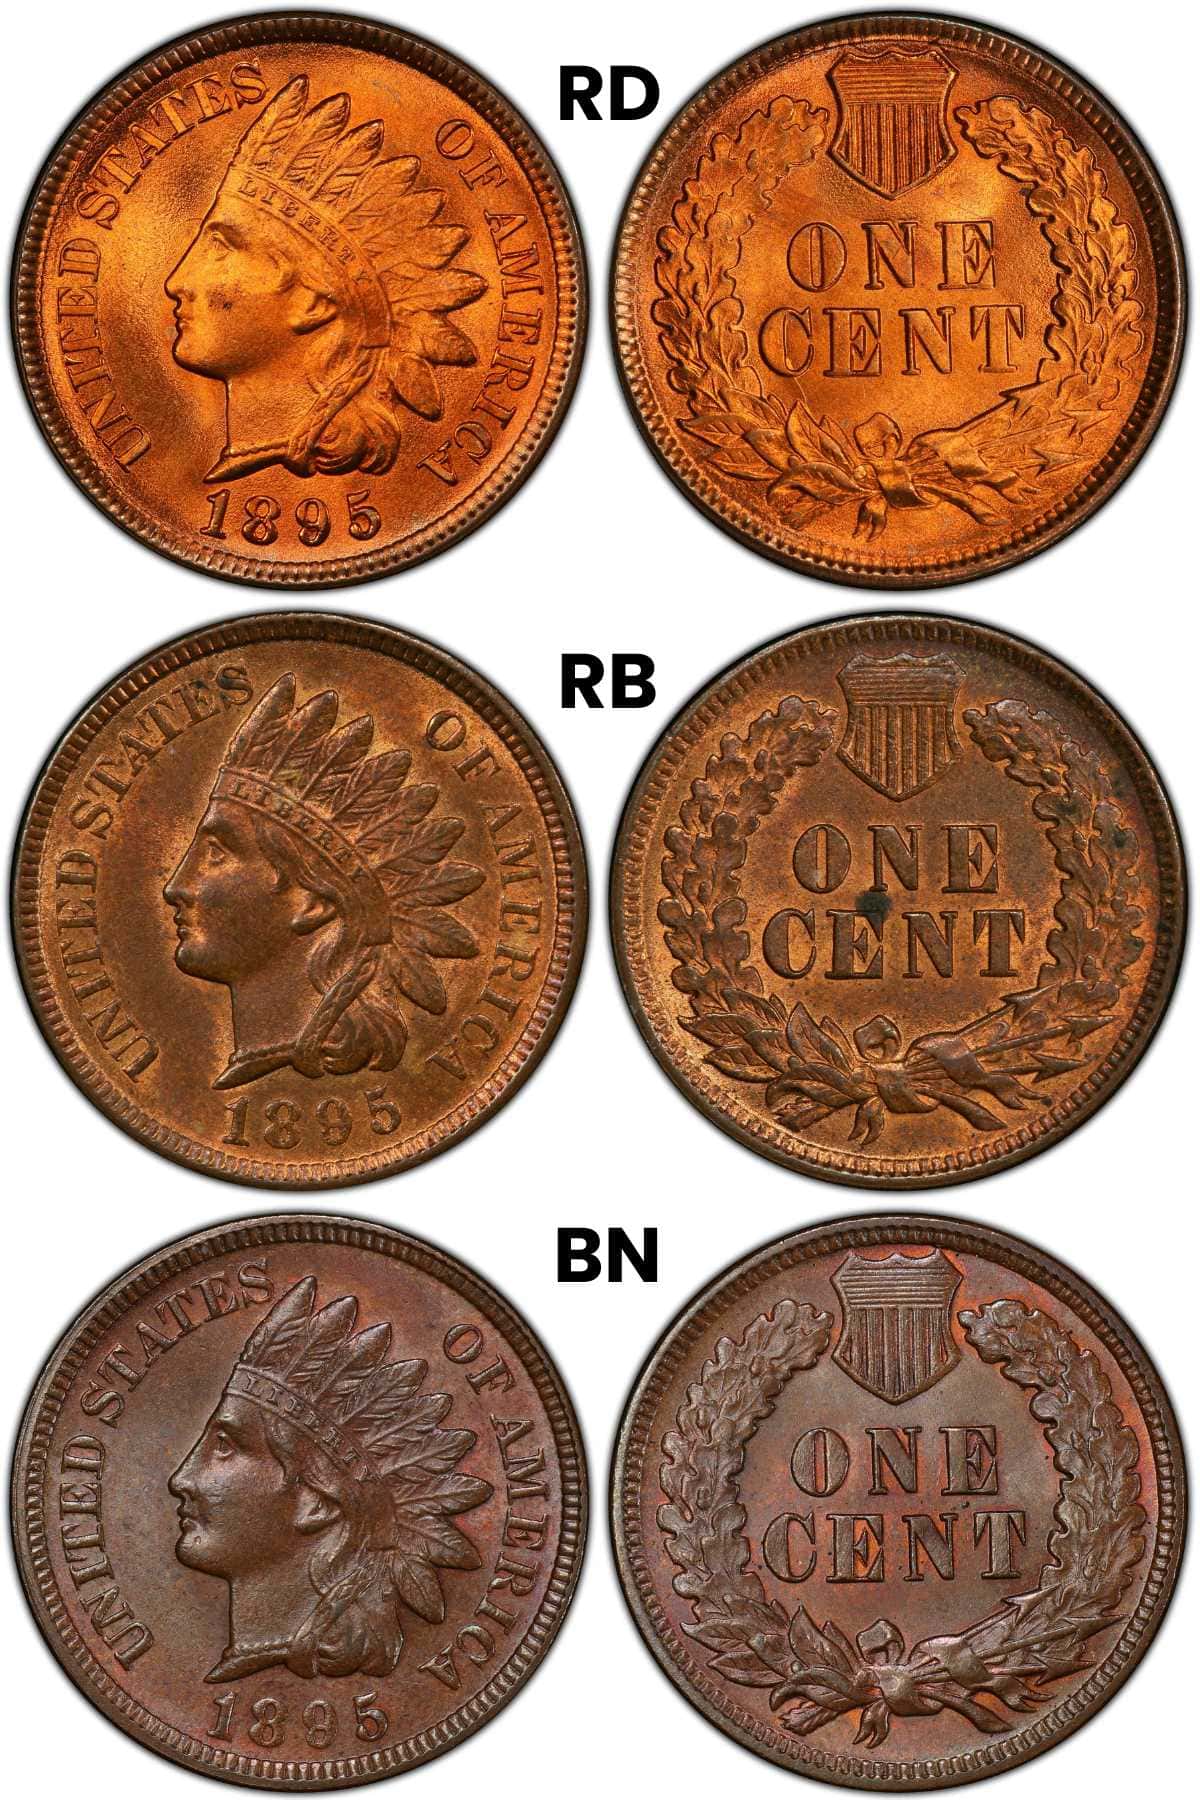 1895 Indian Head Penny color